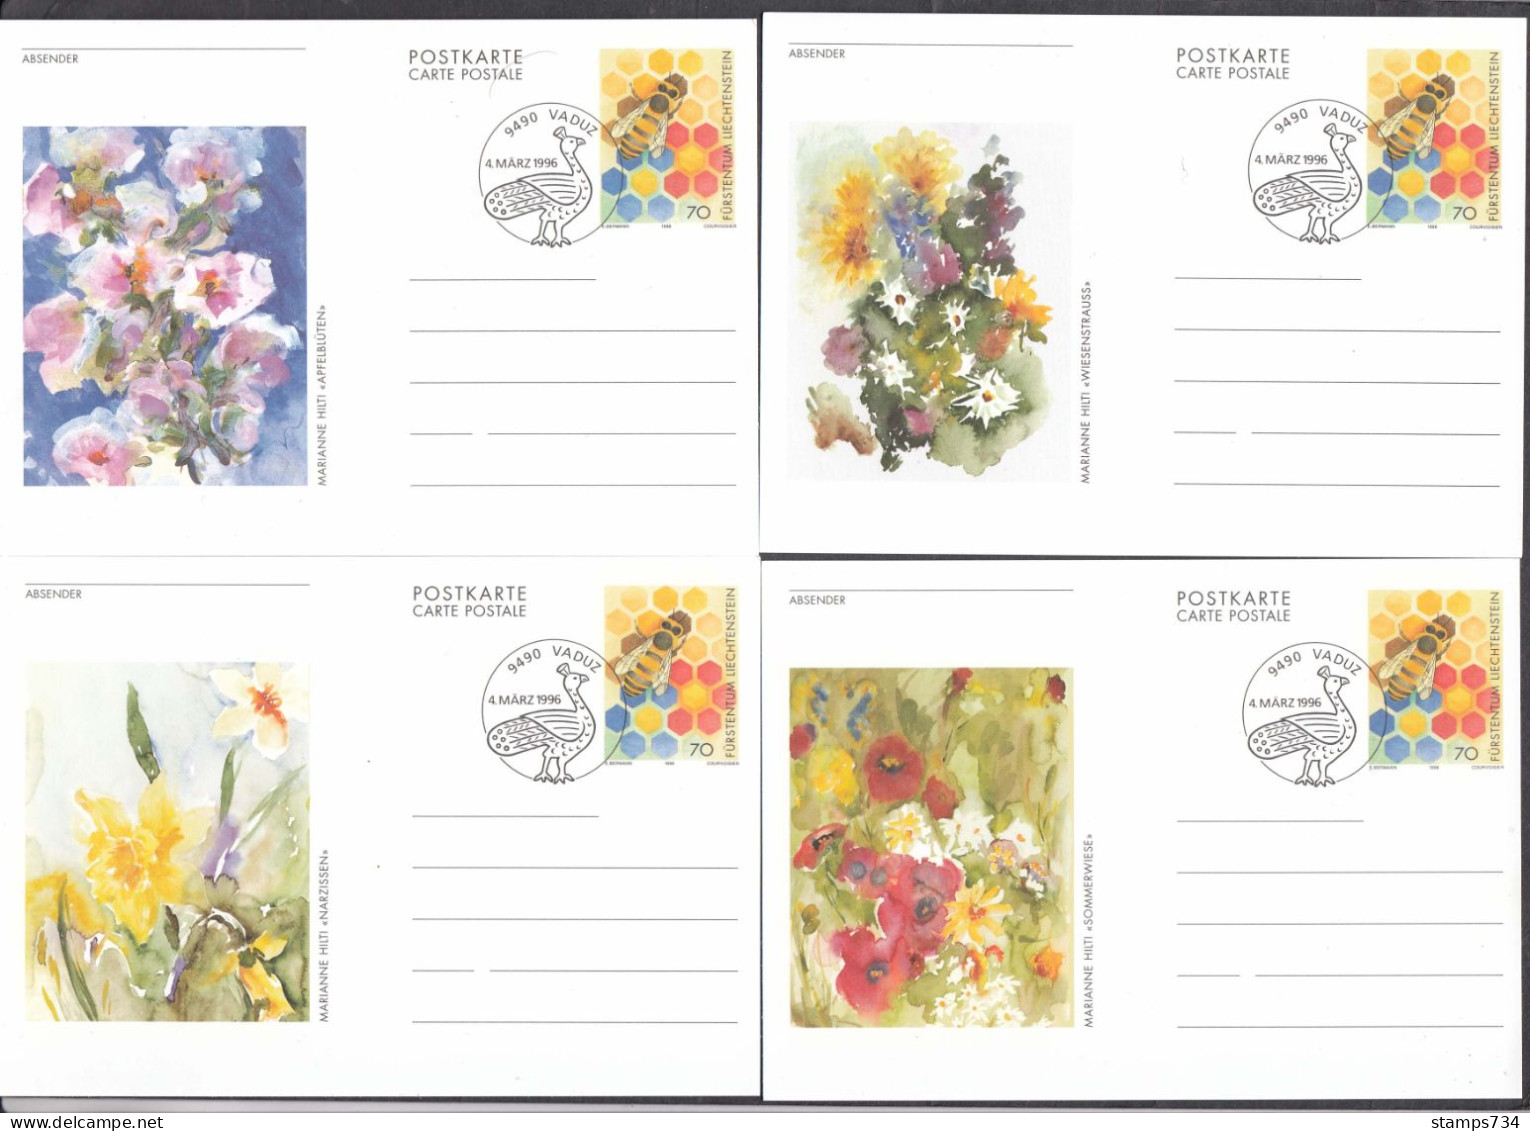 Liechtenstein 1996 - Bee, Flowers: Painting Of Marianne Hilti, 4 Post. Stationery With Spec. Cancelation - Stamped Stationery